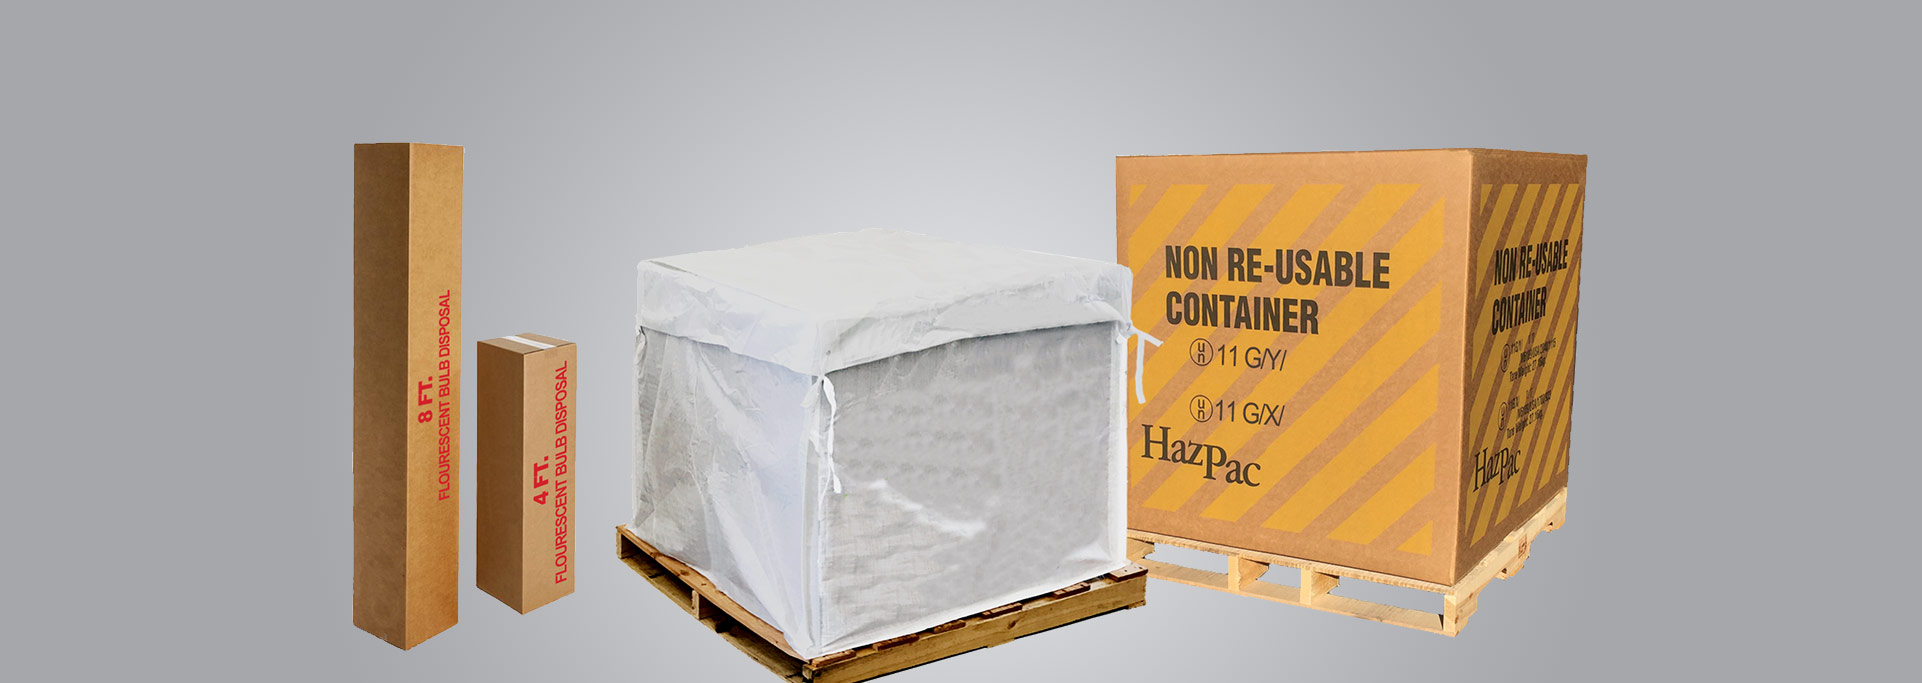 bronstein-container-waste-disposal-packaging-2 | Bronstein Container Co ...